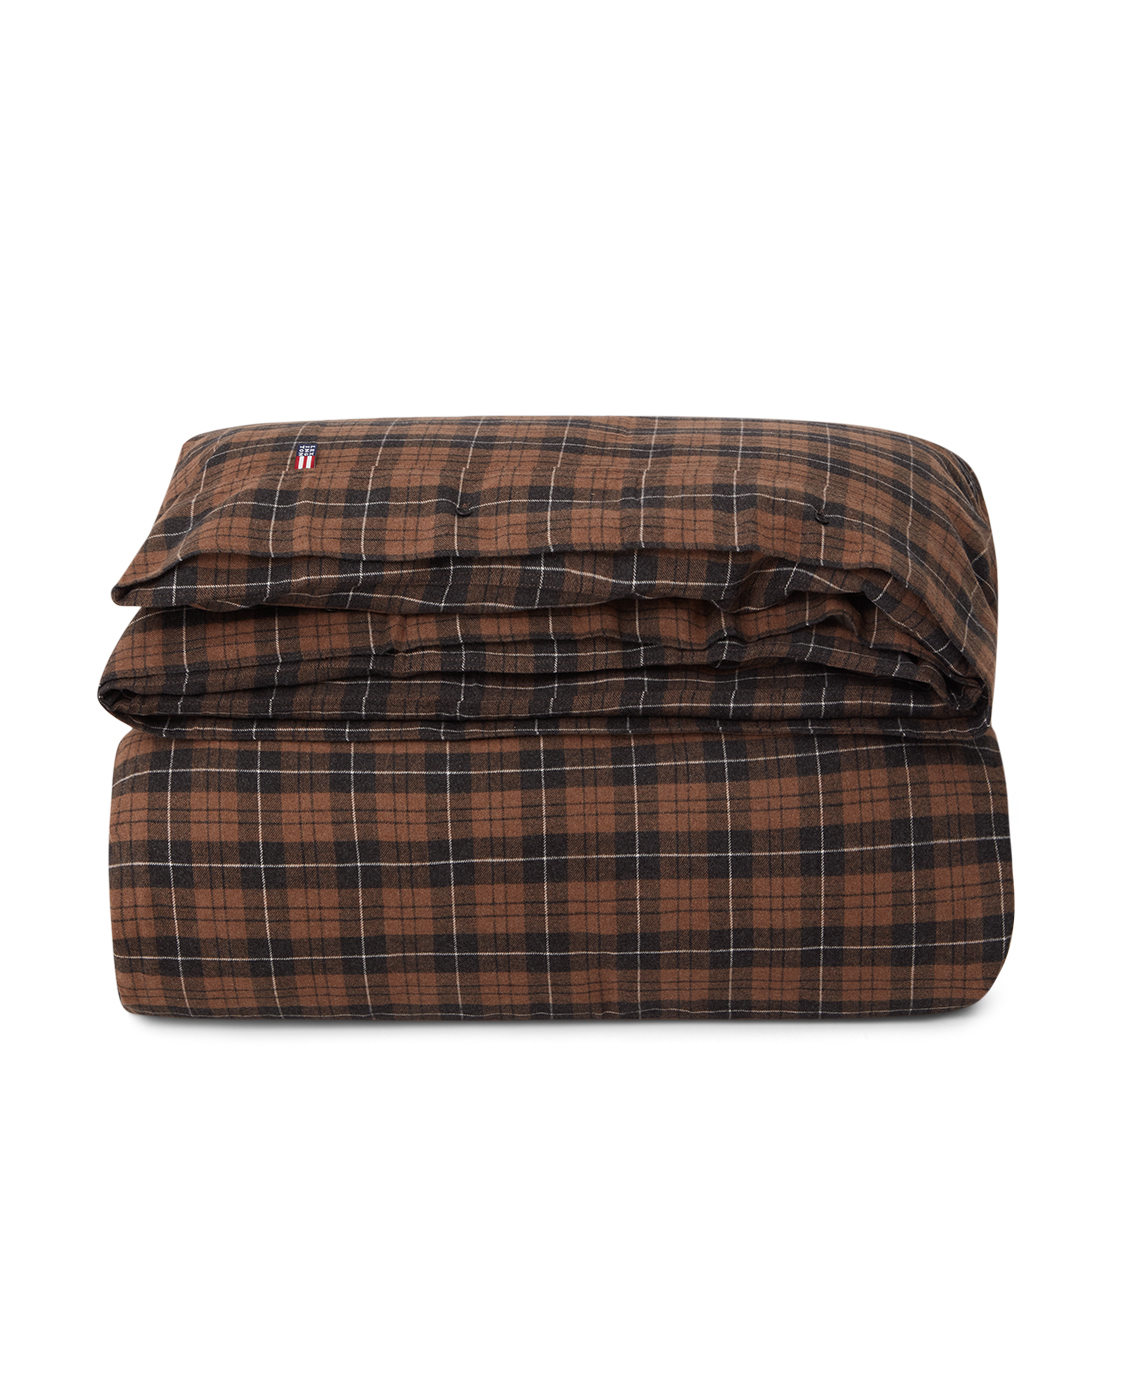 Brown/Dk Gray Checked Cotton Flannel Duvet Cover 150x210